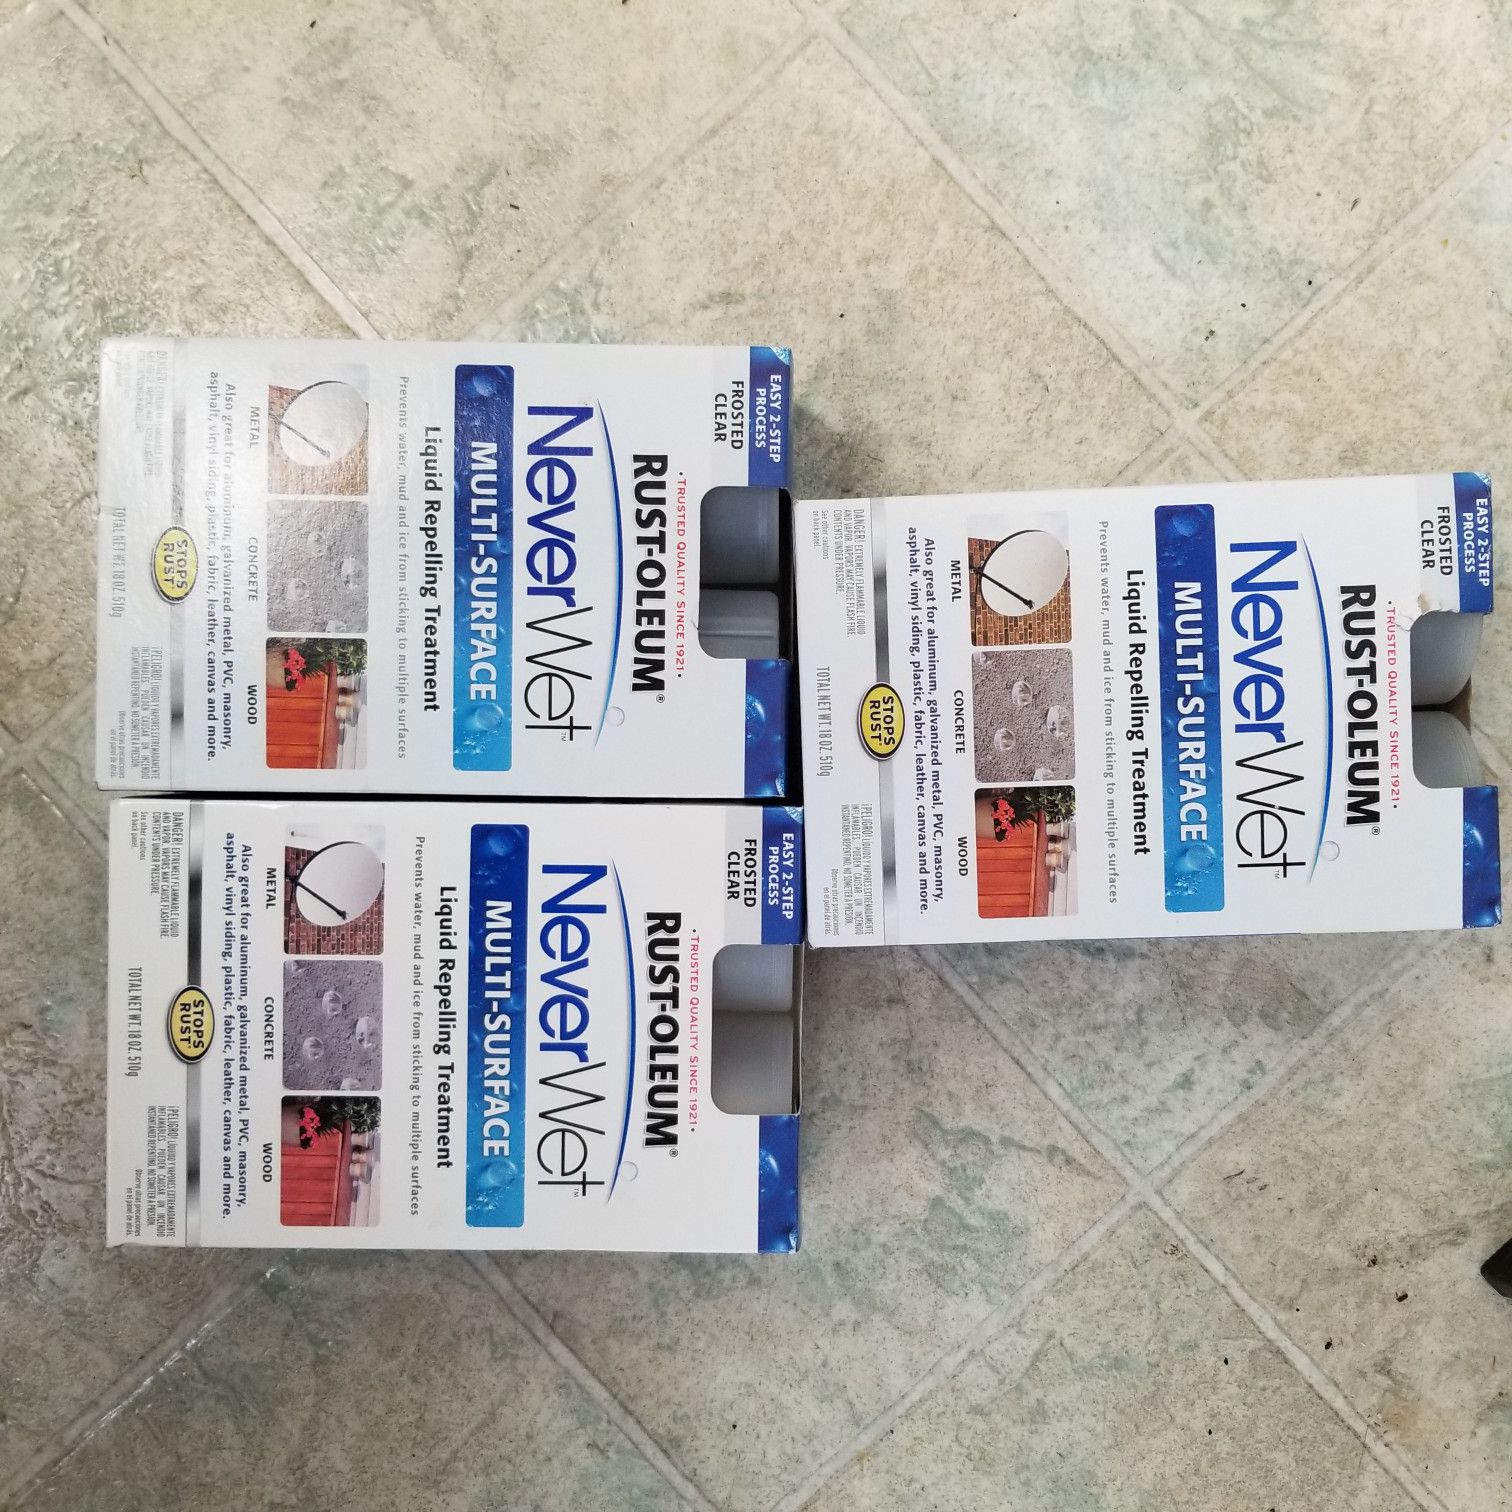 Rustoleum NeverWet sold as lot-all for 1 price